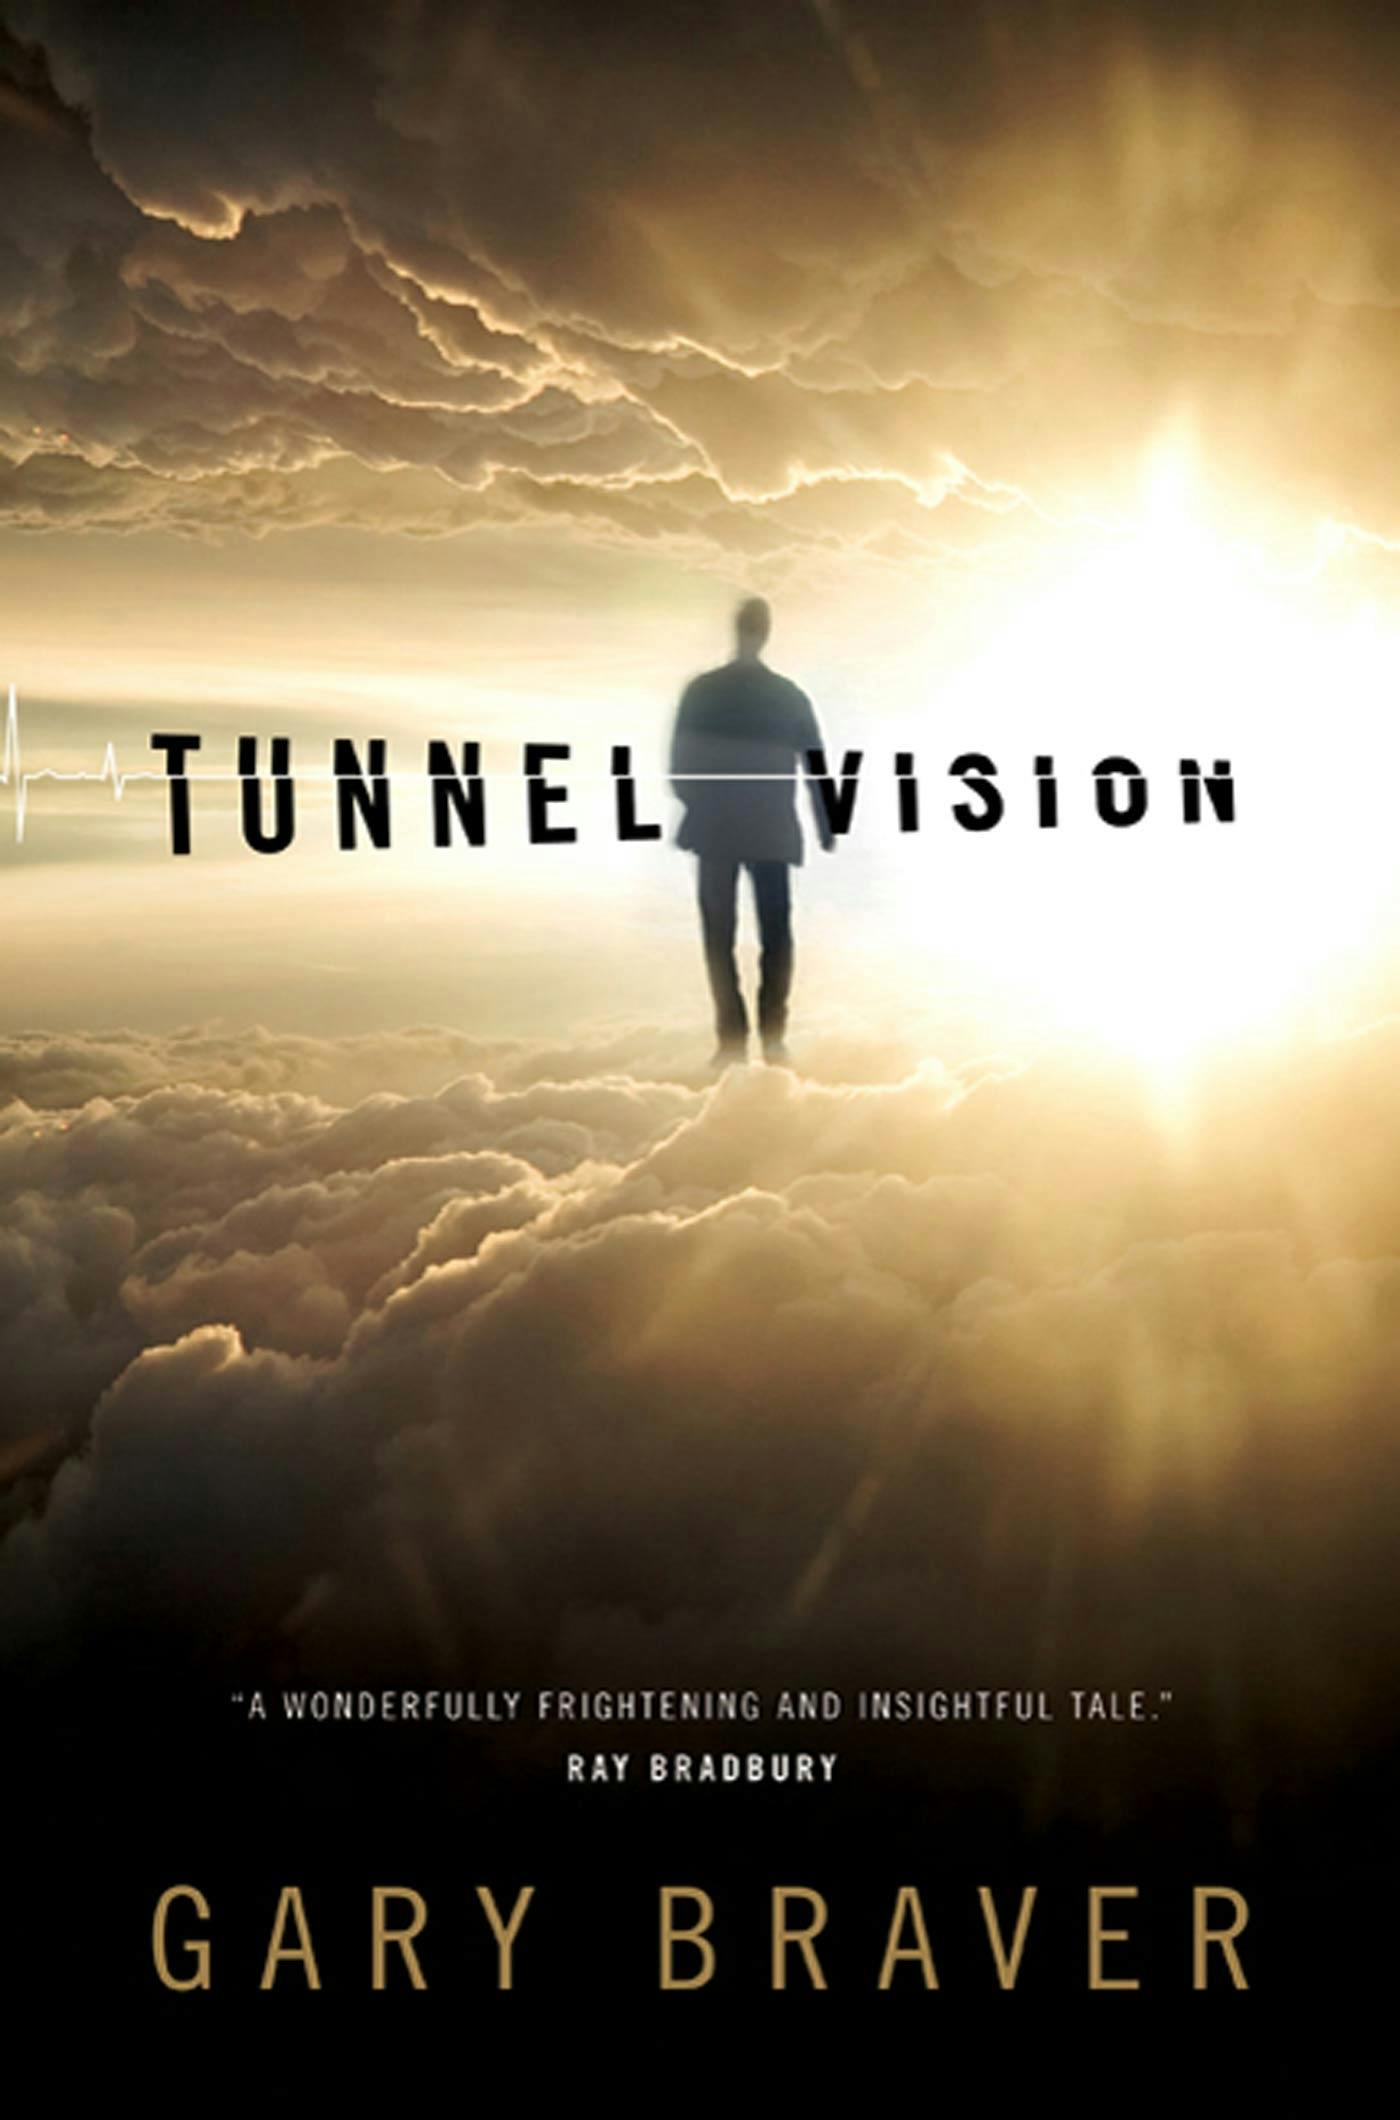 Cover for the book titled as: Tunnel Vision